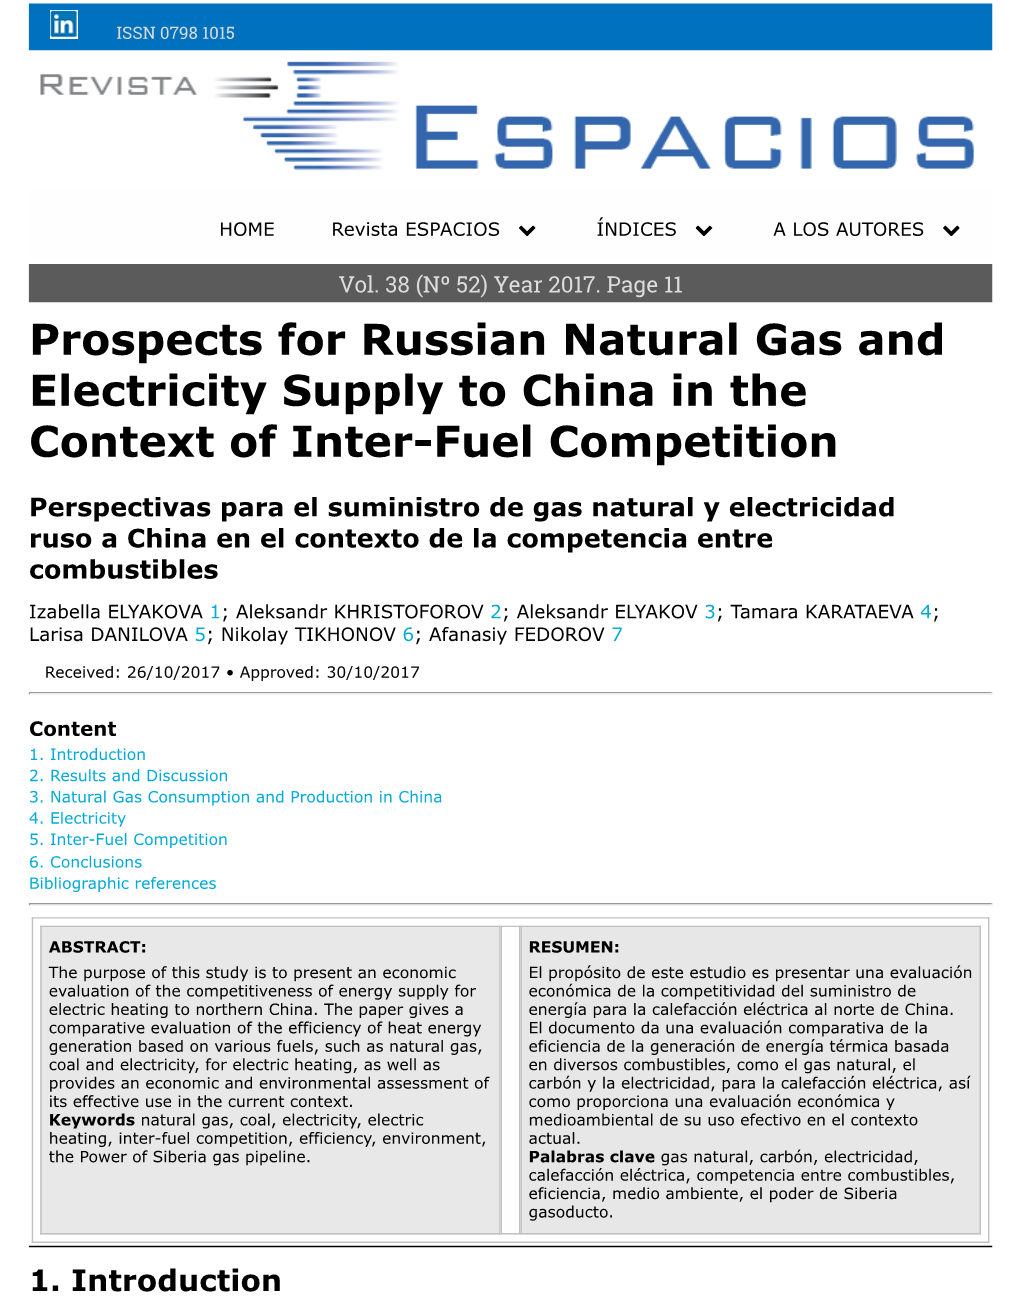 Prospects for Russian Natural Gas and Electricity Supply to China in the Context of Inter-Fuel Competition